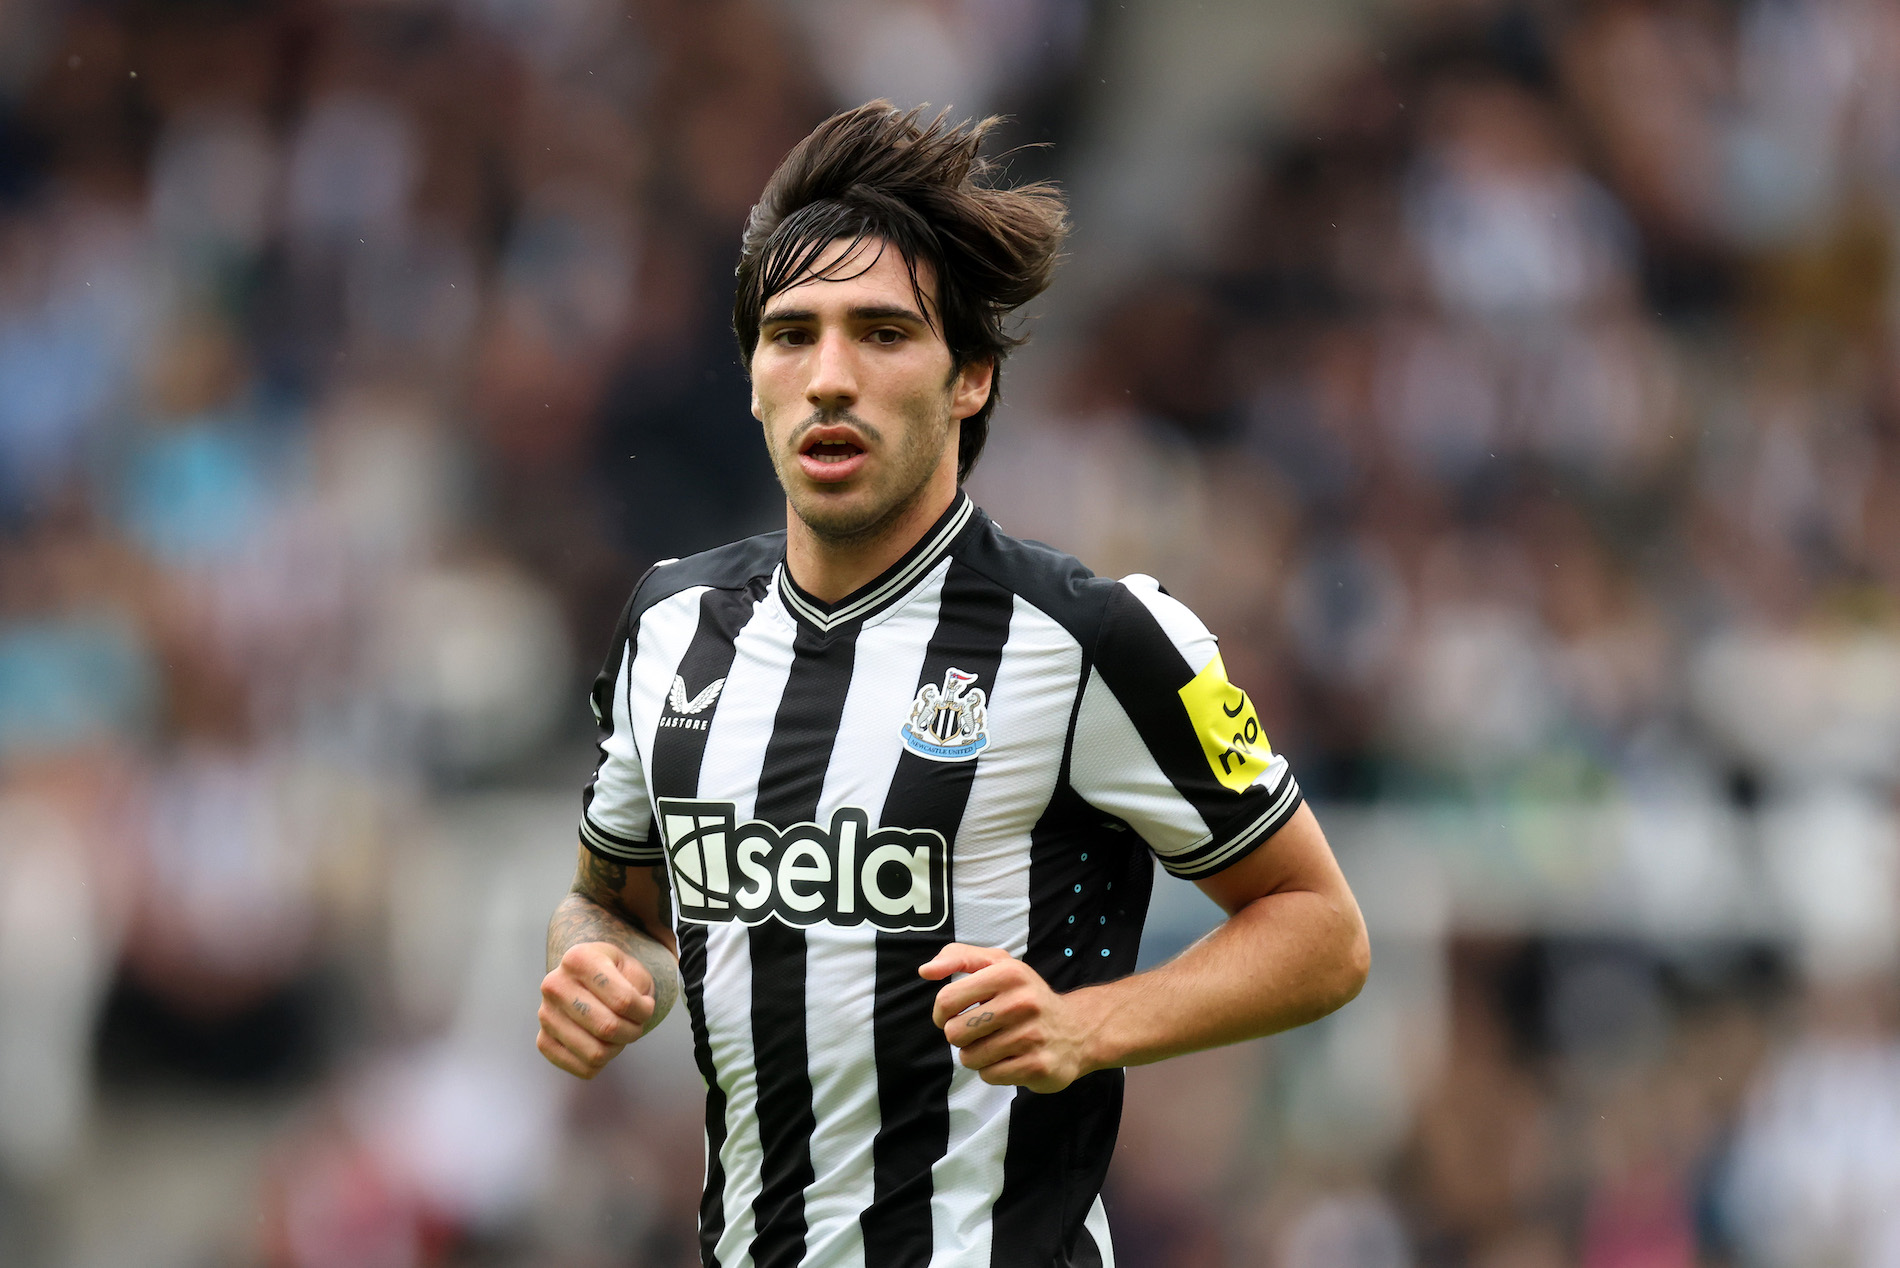 Sandro Tonali was questioned for two and a half hours by the Turin’s DA office on Tuesday and admitted to betting on football matches too.